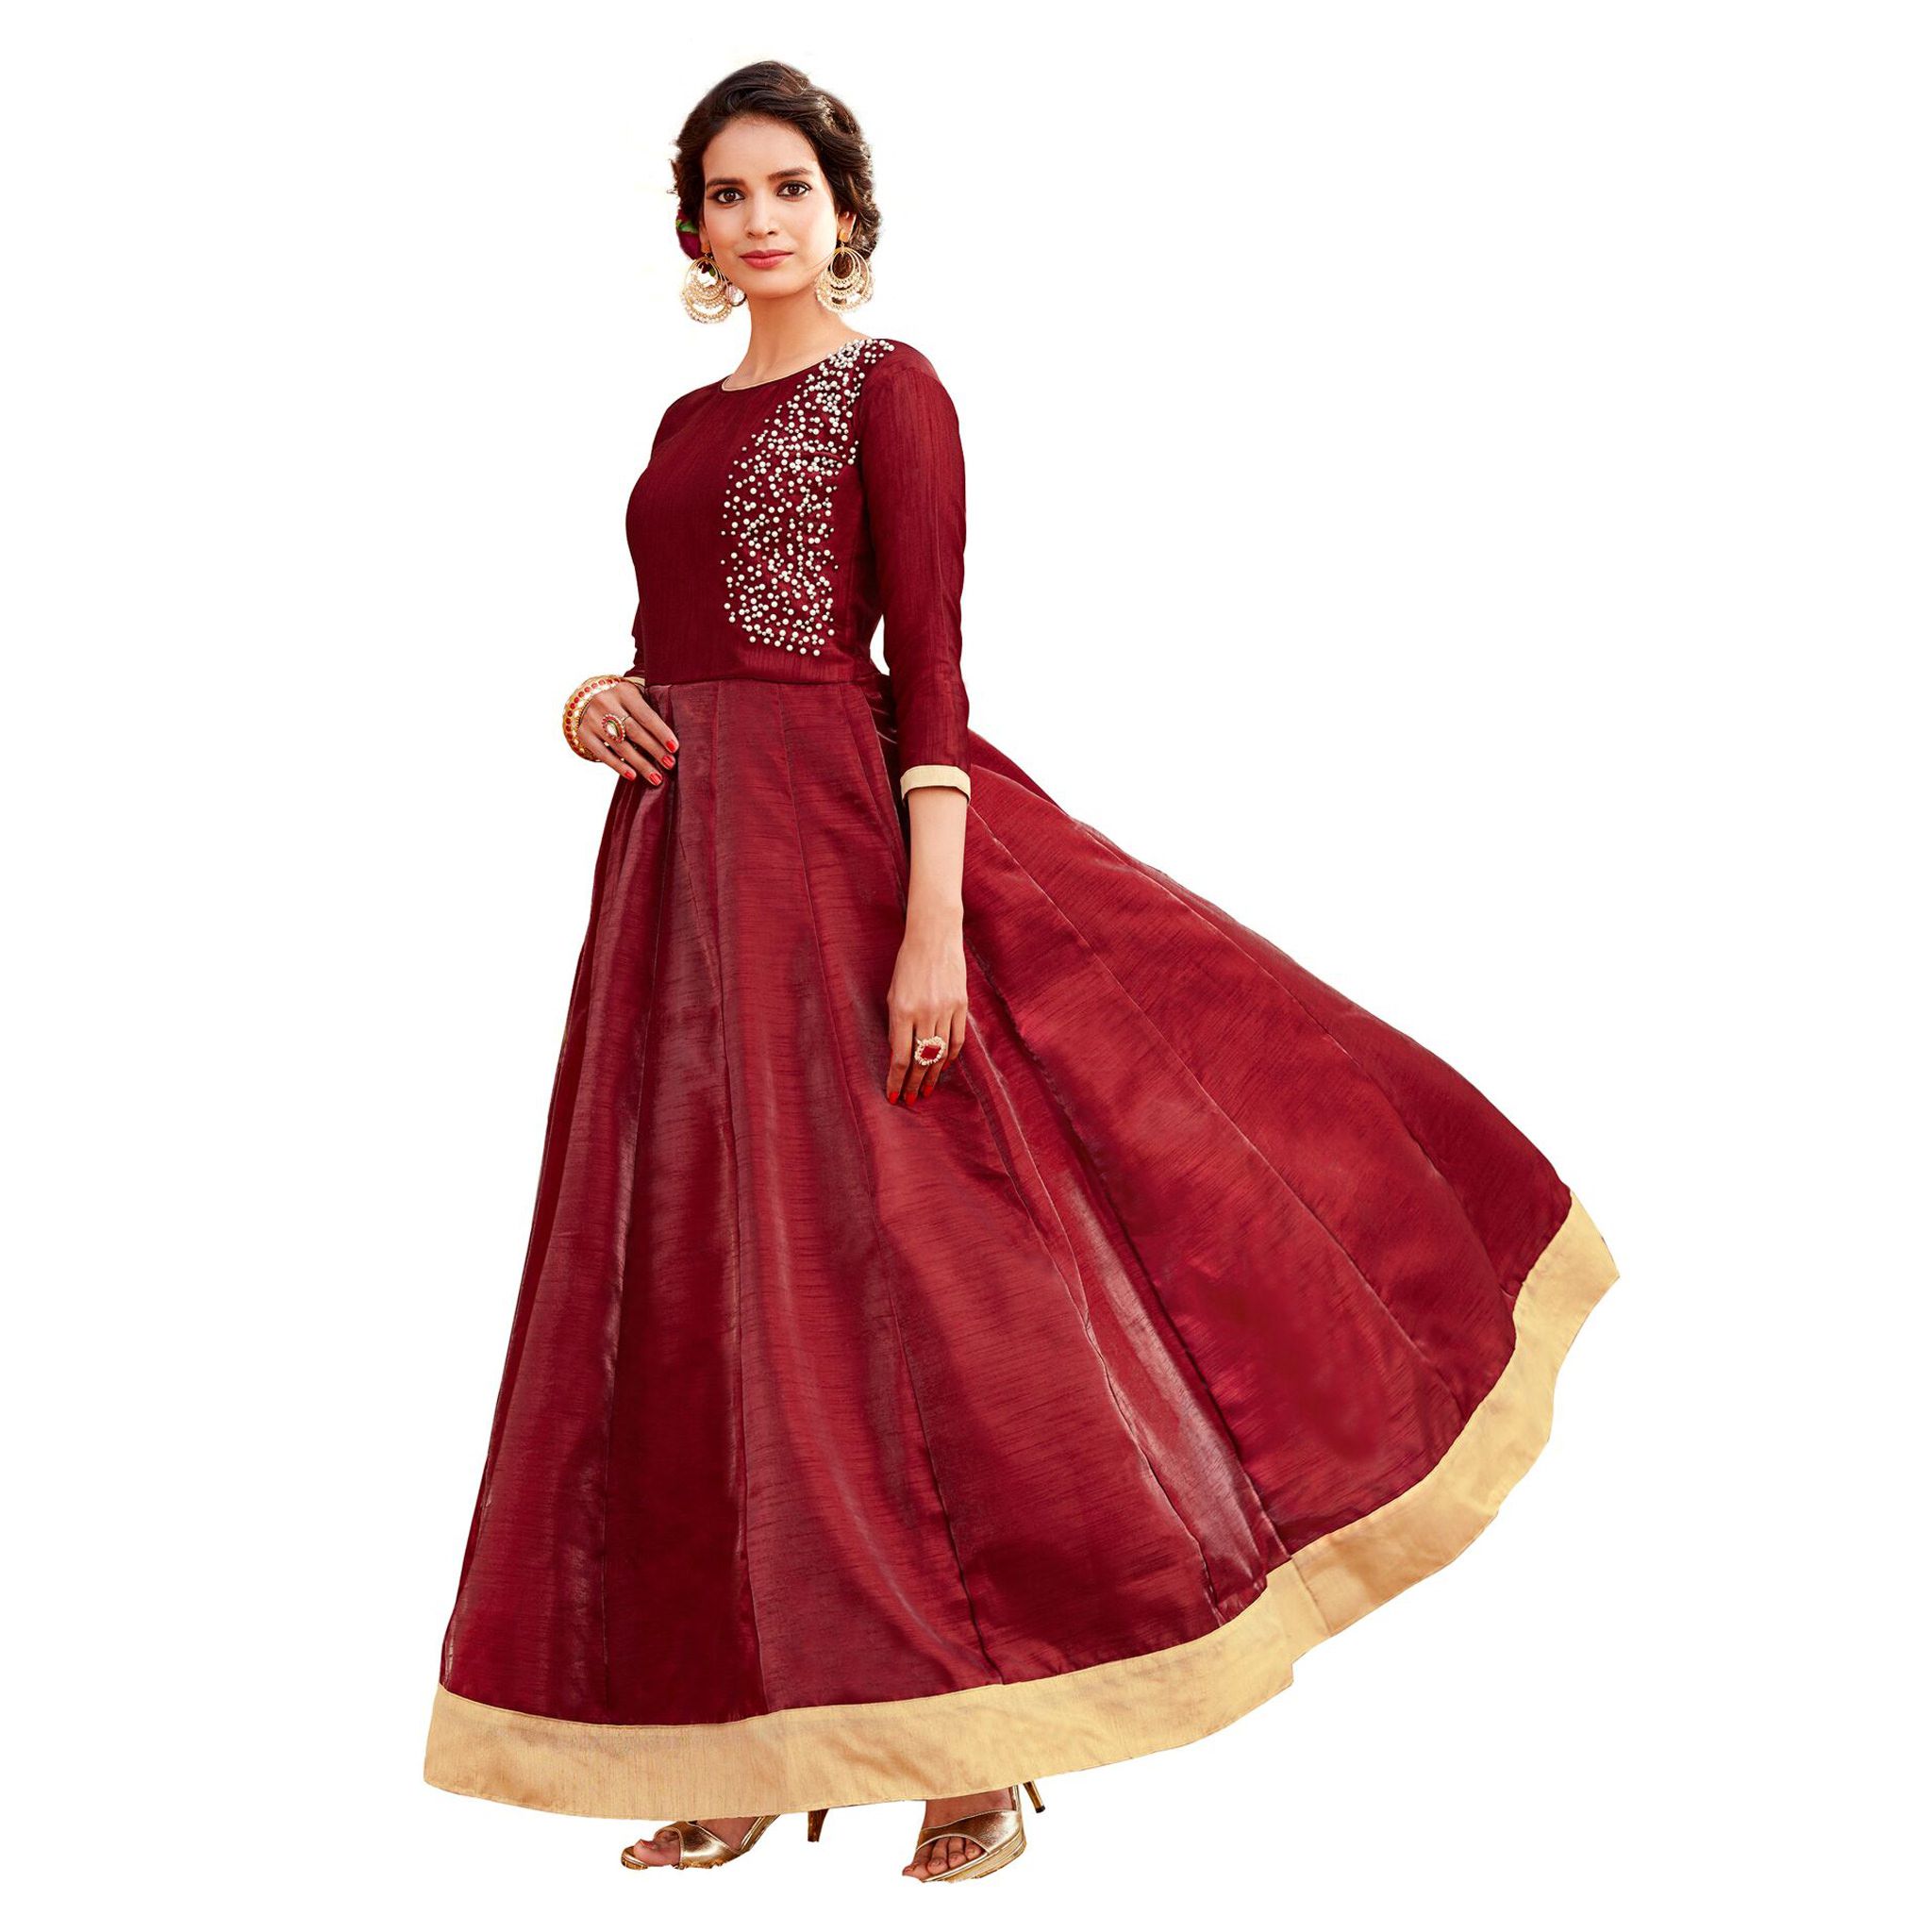 Aryan Fashion Store Red and Beige Satin Anarkali Gown Semi-Stitched ...